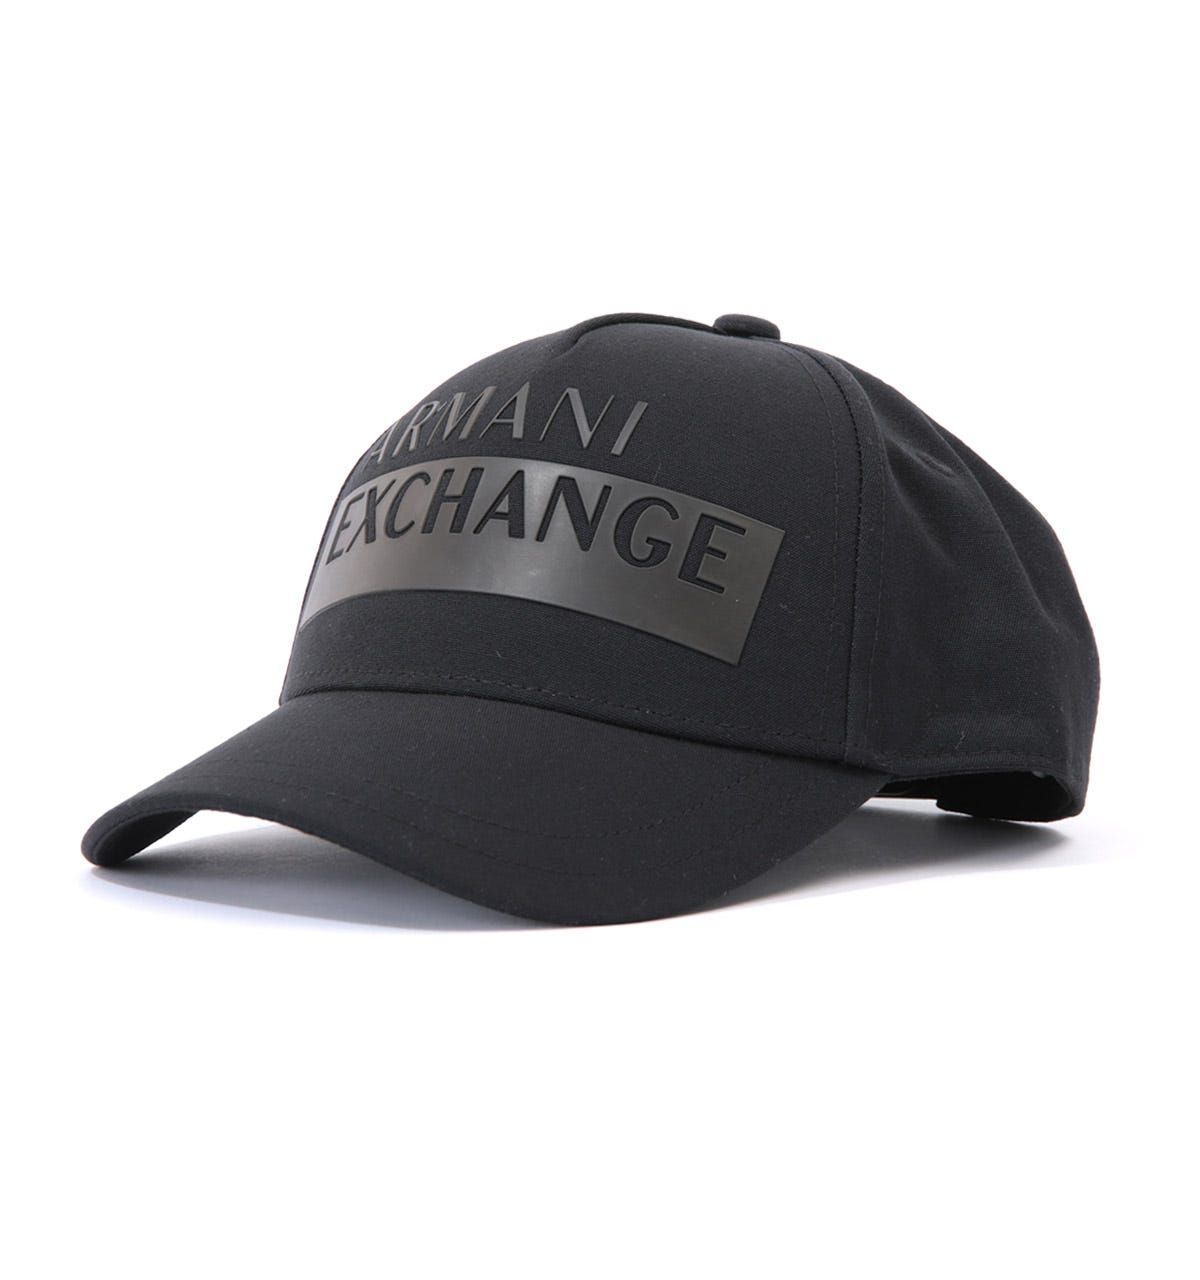 Upgrade your accessories with this sleek and stylish Armani Exchange cap. Featuring a classic baseball cap design with five panels, this cap is a simple statement piece to add to your outfit. The iconic Armani Exchange logo is printed on the front in a tonal layered print.One Size, Recycled Polyester & Cotton Composition, Adjustable Snap Back Strap, Tonal Stitching, Five Panel Design, Armani Exchange Branding.